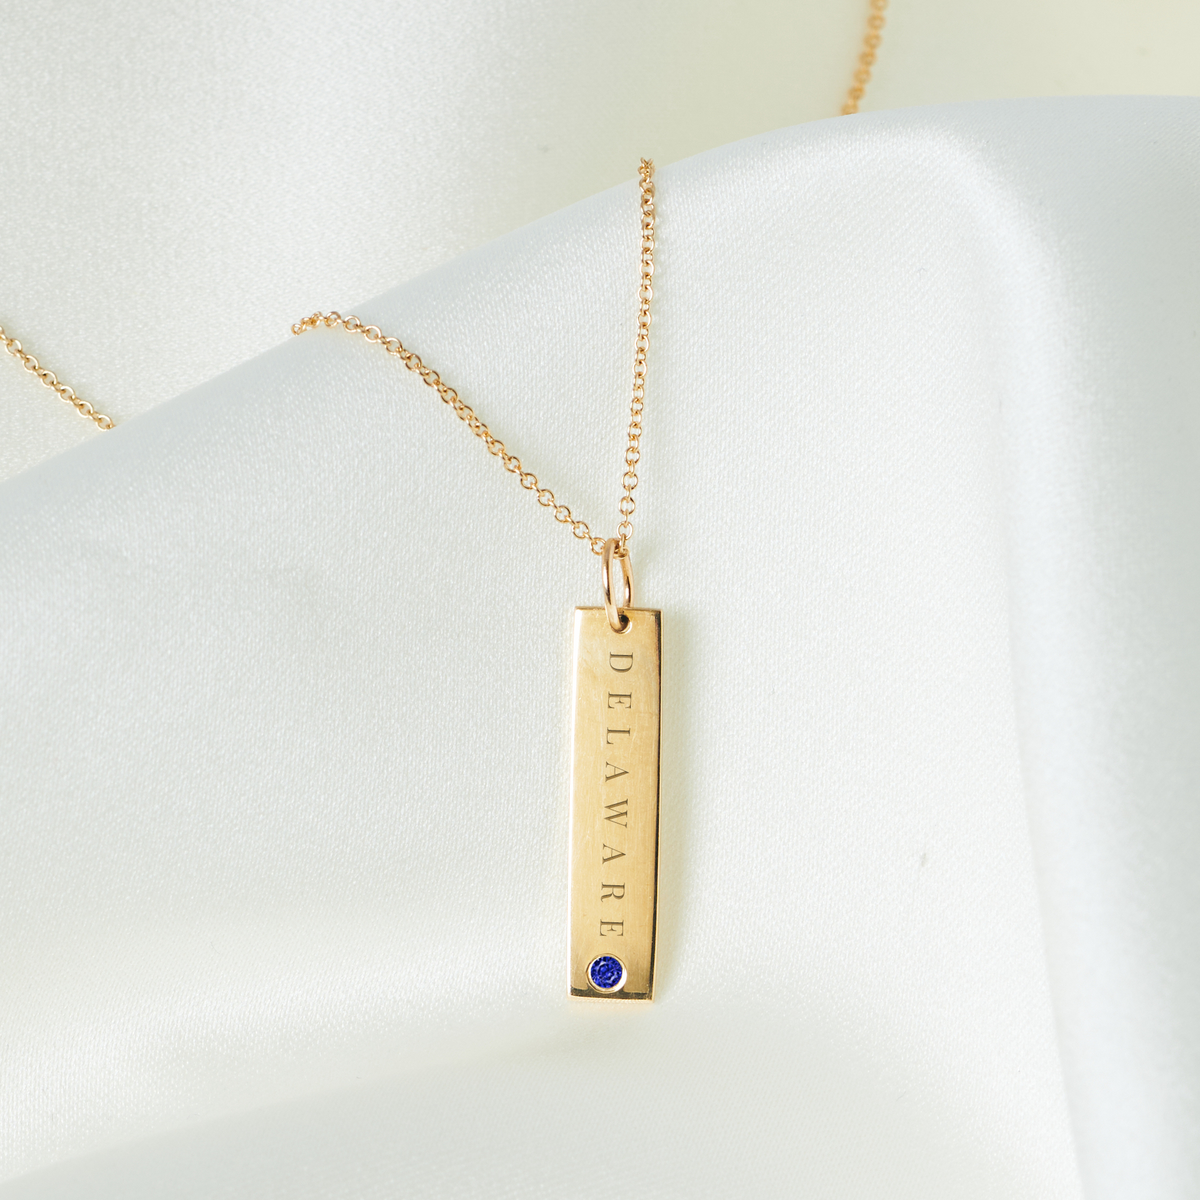 Delaware Sapphire Gemstone Bar laydown shown in gold on cable chain